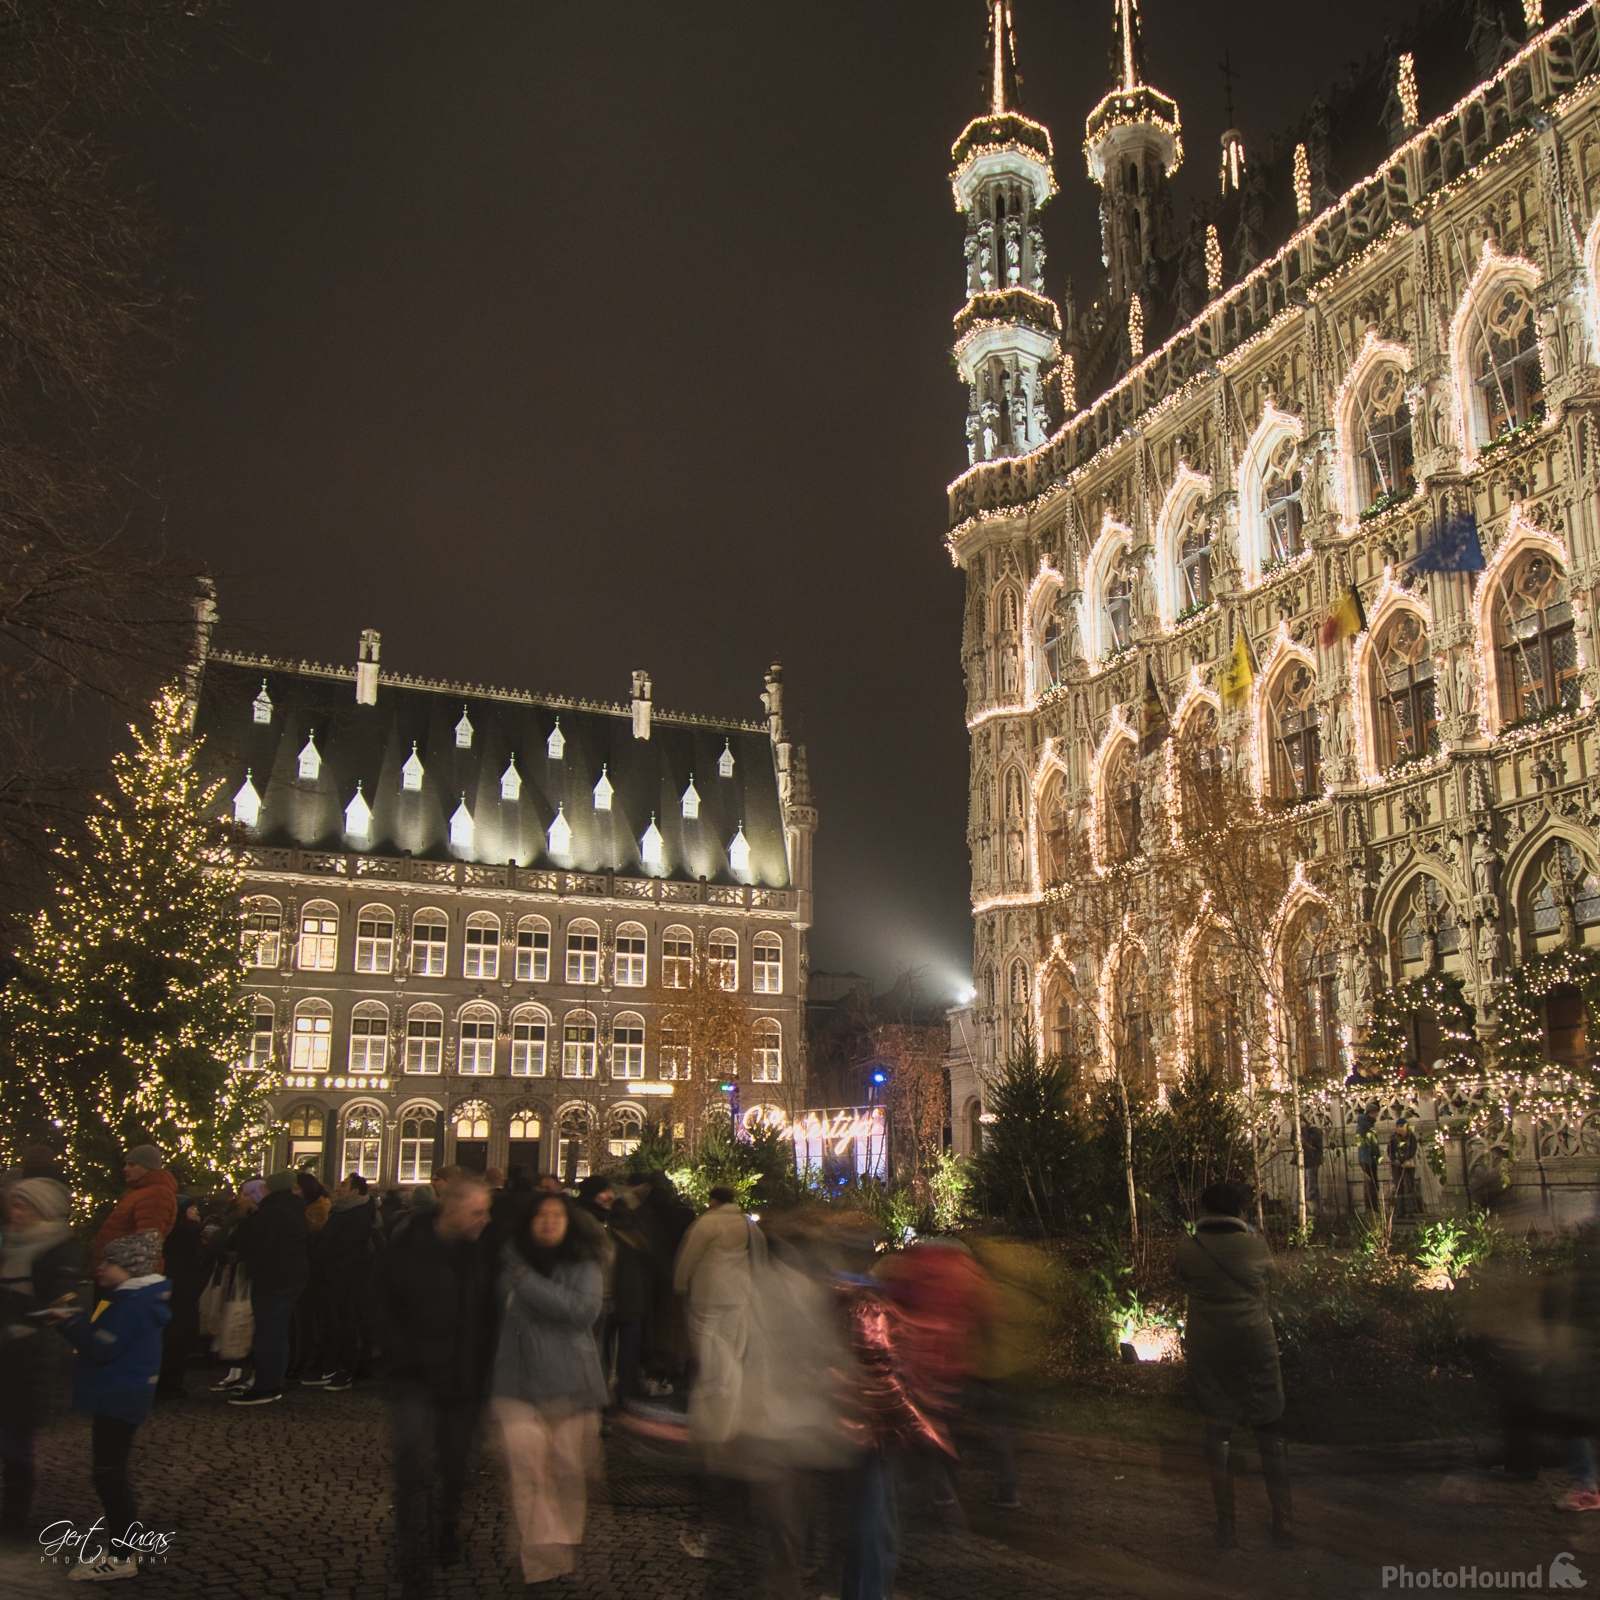 Image of Leuven Grand Plaza by Gert Lucas